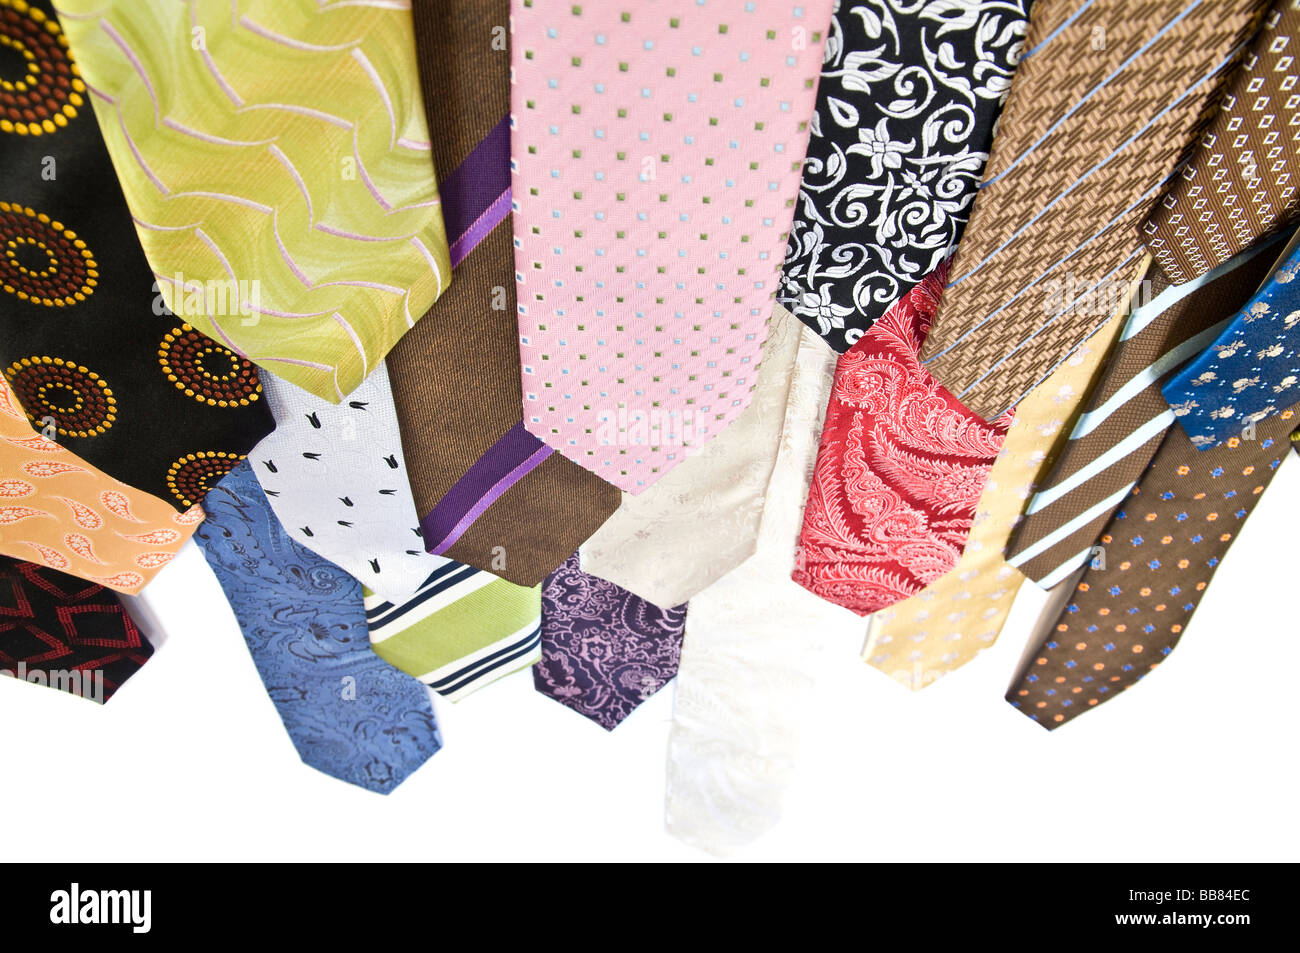 Ties with different designs, from above Stock Photo